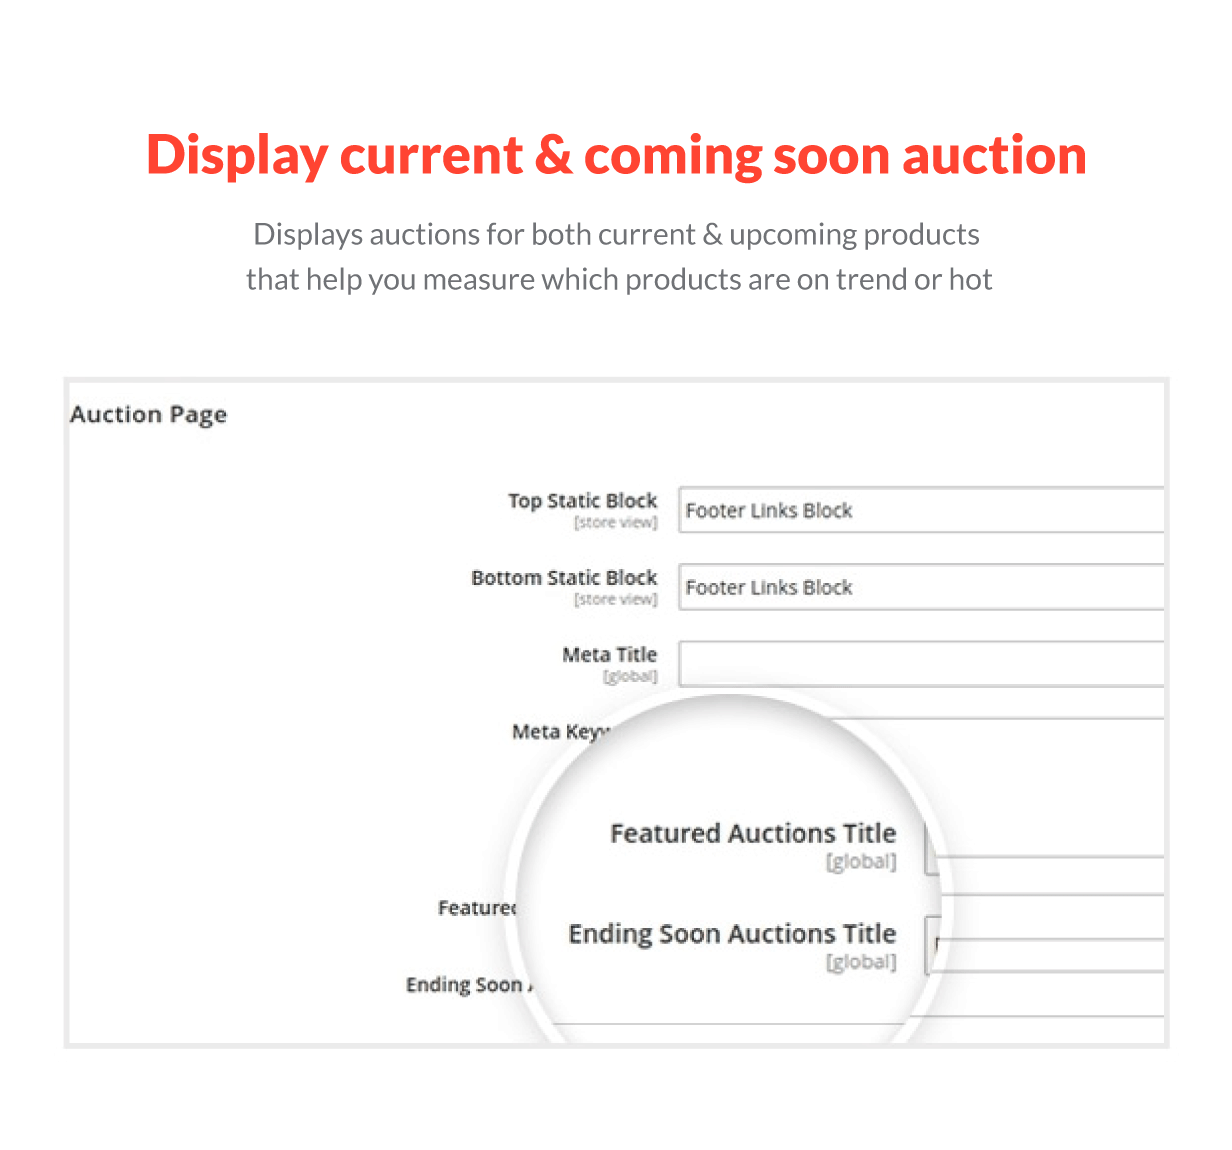 Available Auction For Current & Upcoming Product